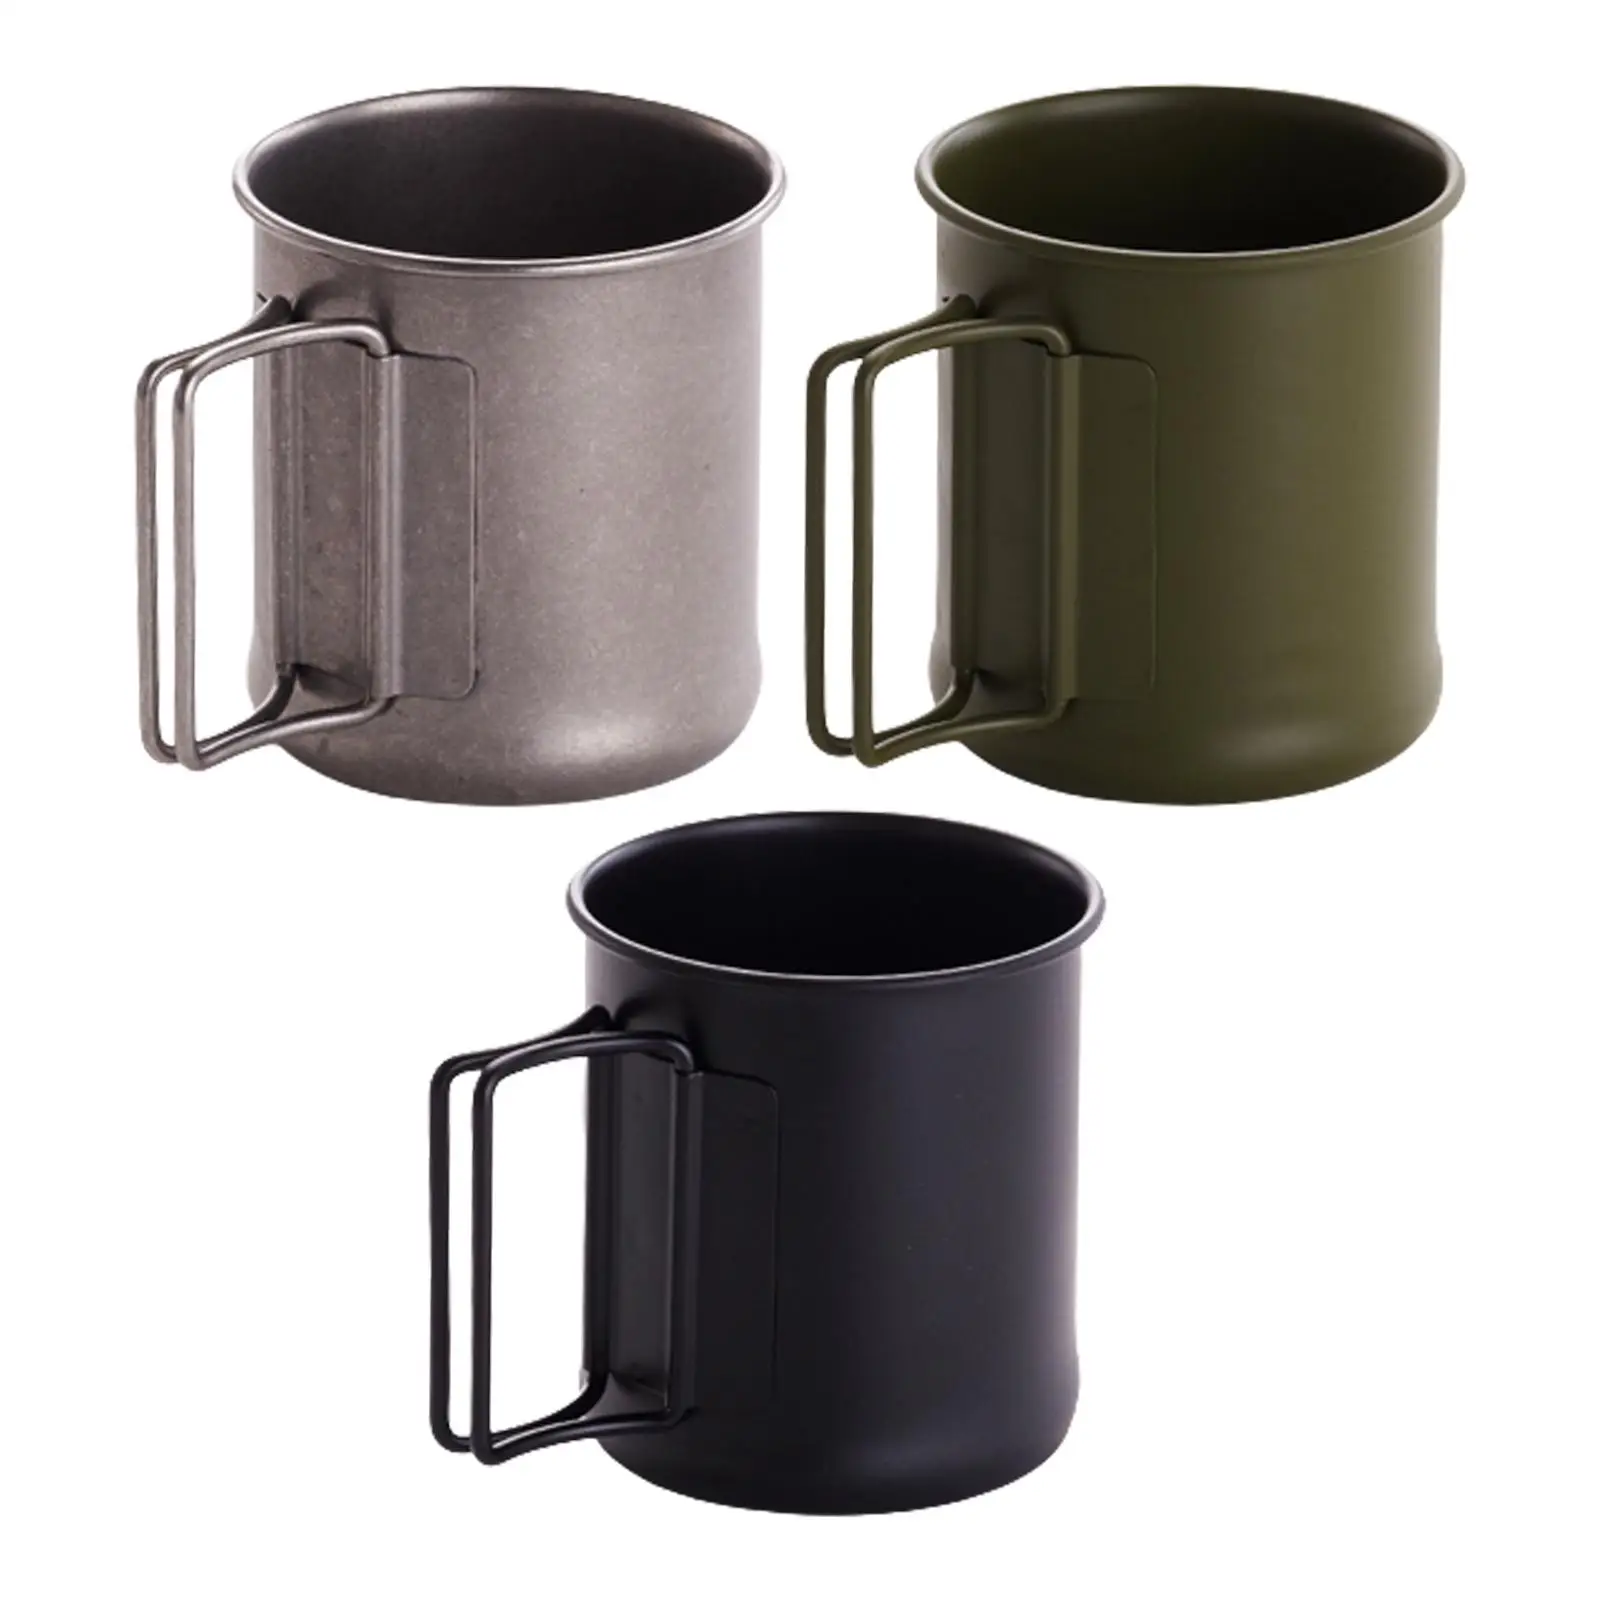 Stainless Steel Camping Cup Travel Cup Durable Metal Cups with Folding Handles Water Cup for Outdoor Touring Cooking Backpacking